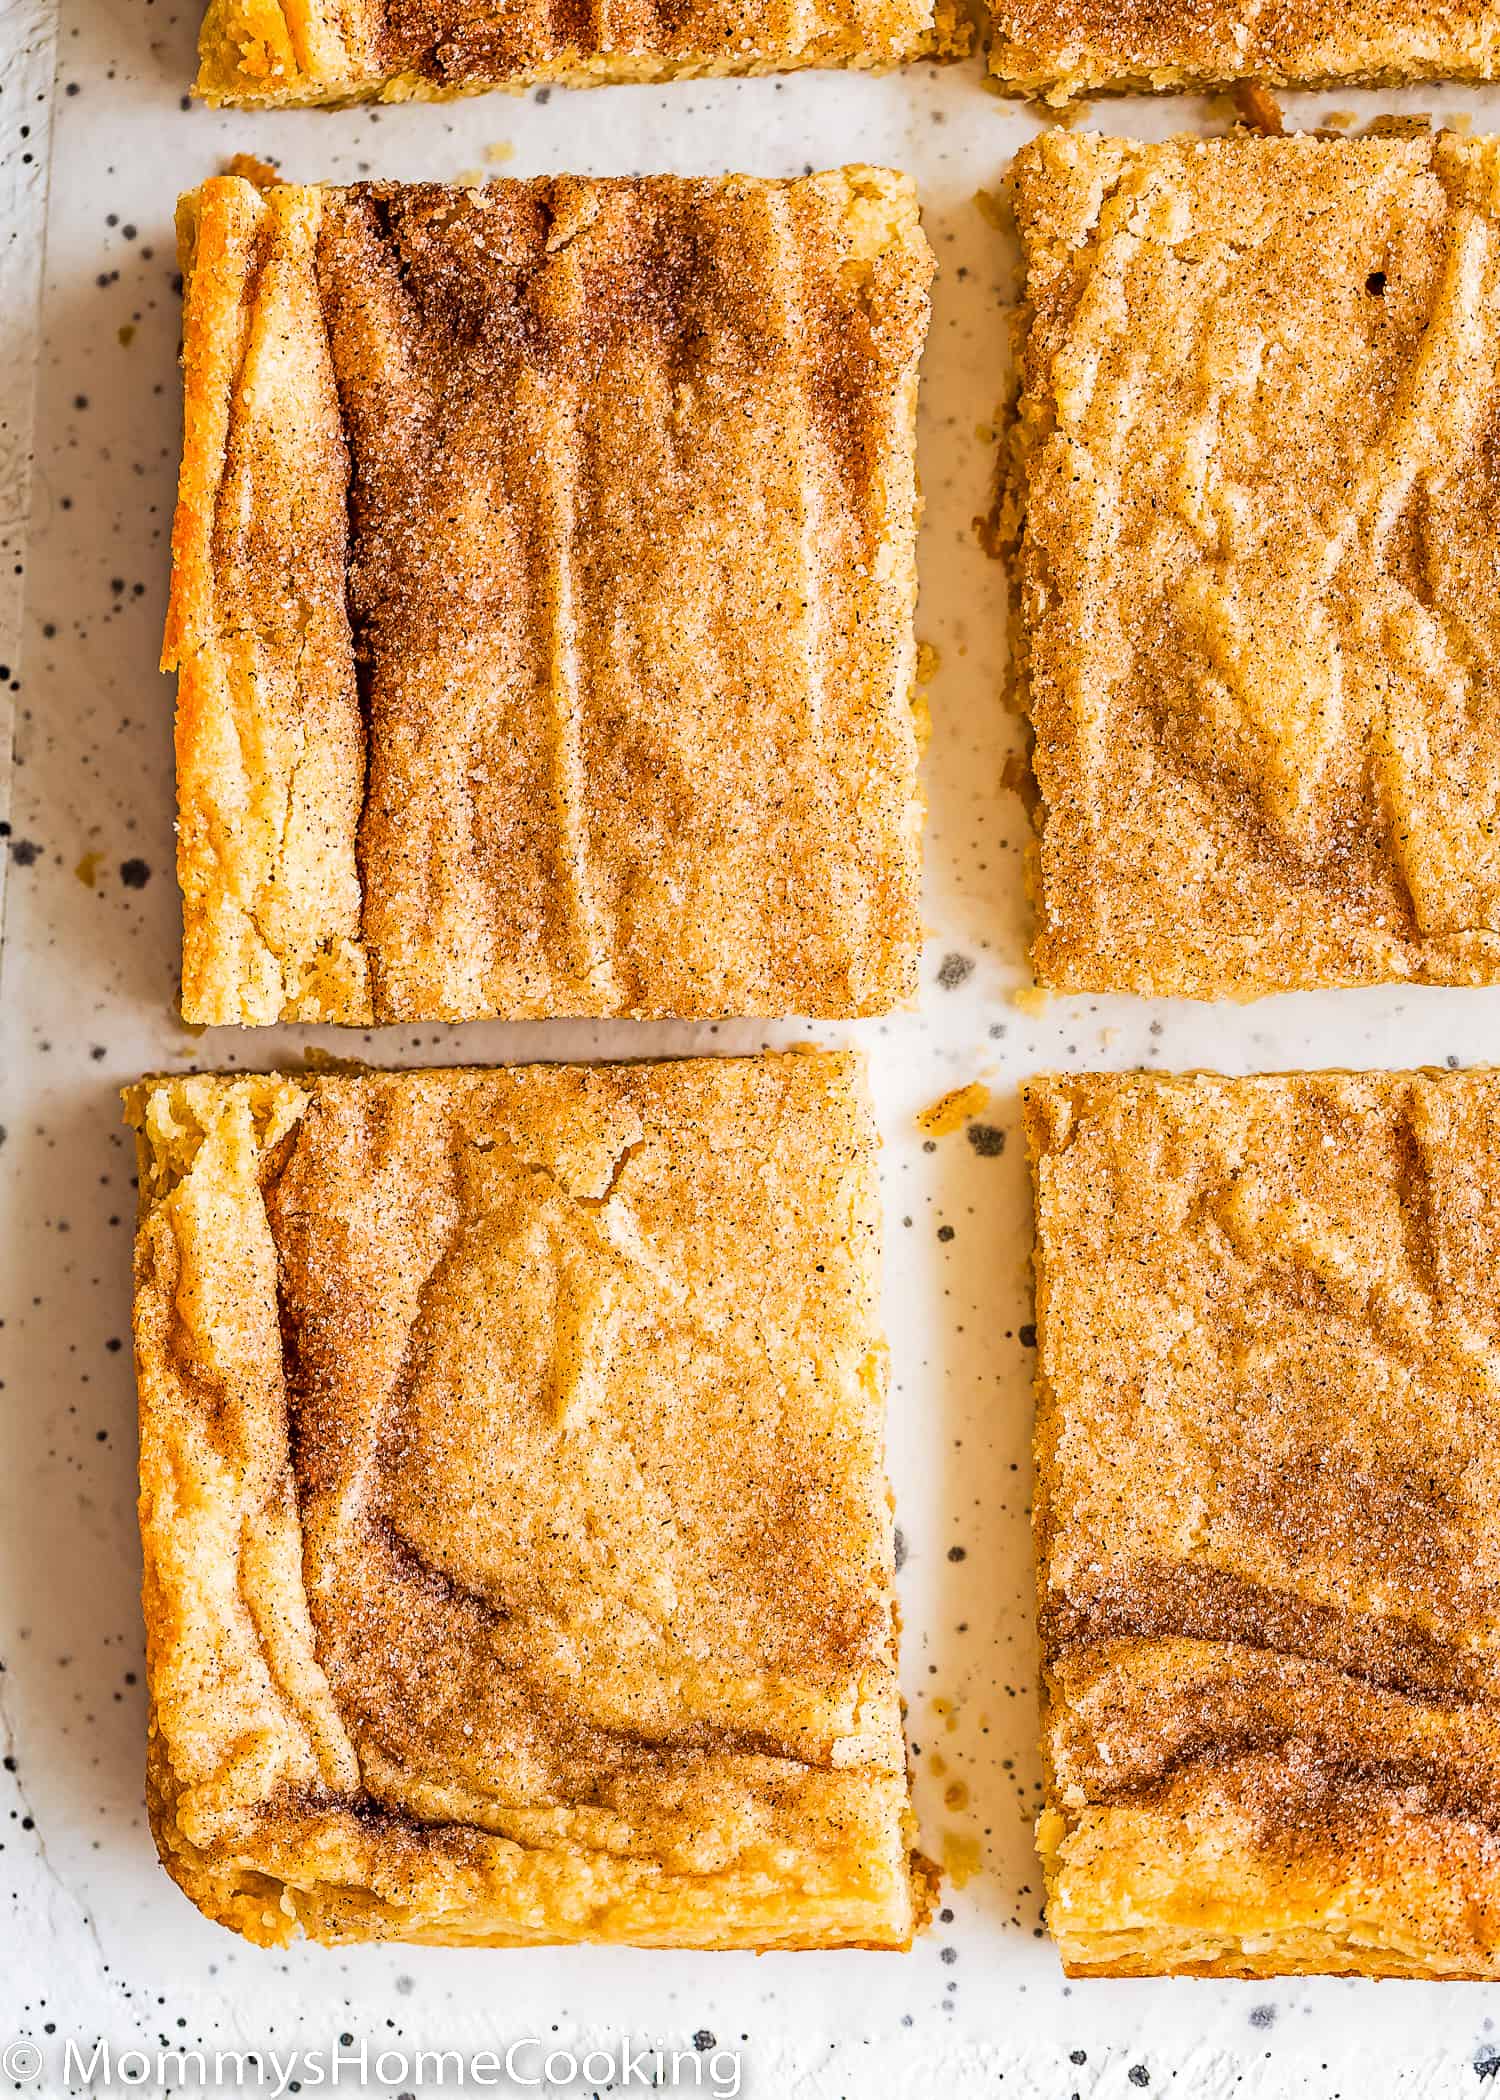 egg-free Snickerdoodle Bars over a white surface.